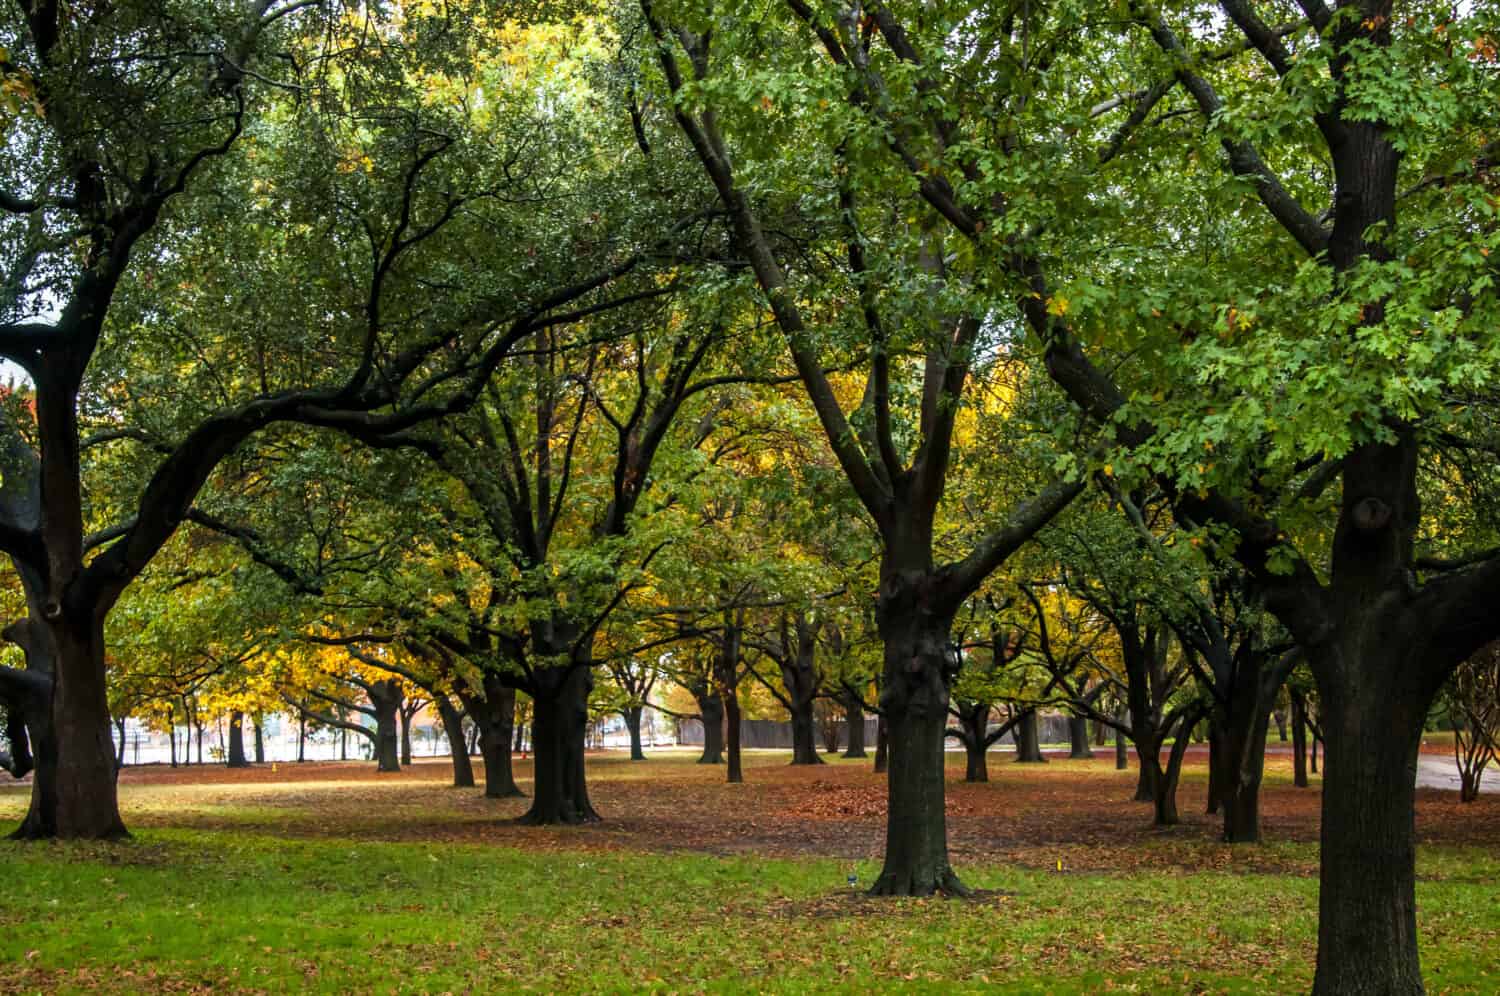 Grove of trees during fall in north Texas. Fort Worth, Dallas area. Large grove of lush green trees. Brown and yellow leaves on the ground. Damp, rainy autumn day. Horizontal orientation.